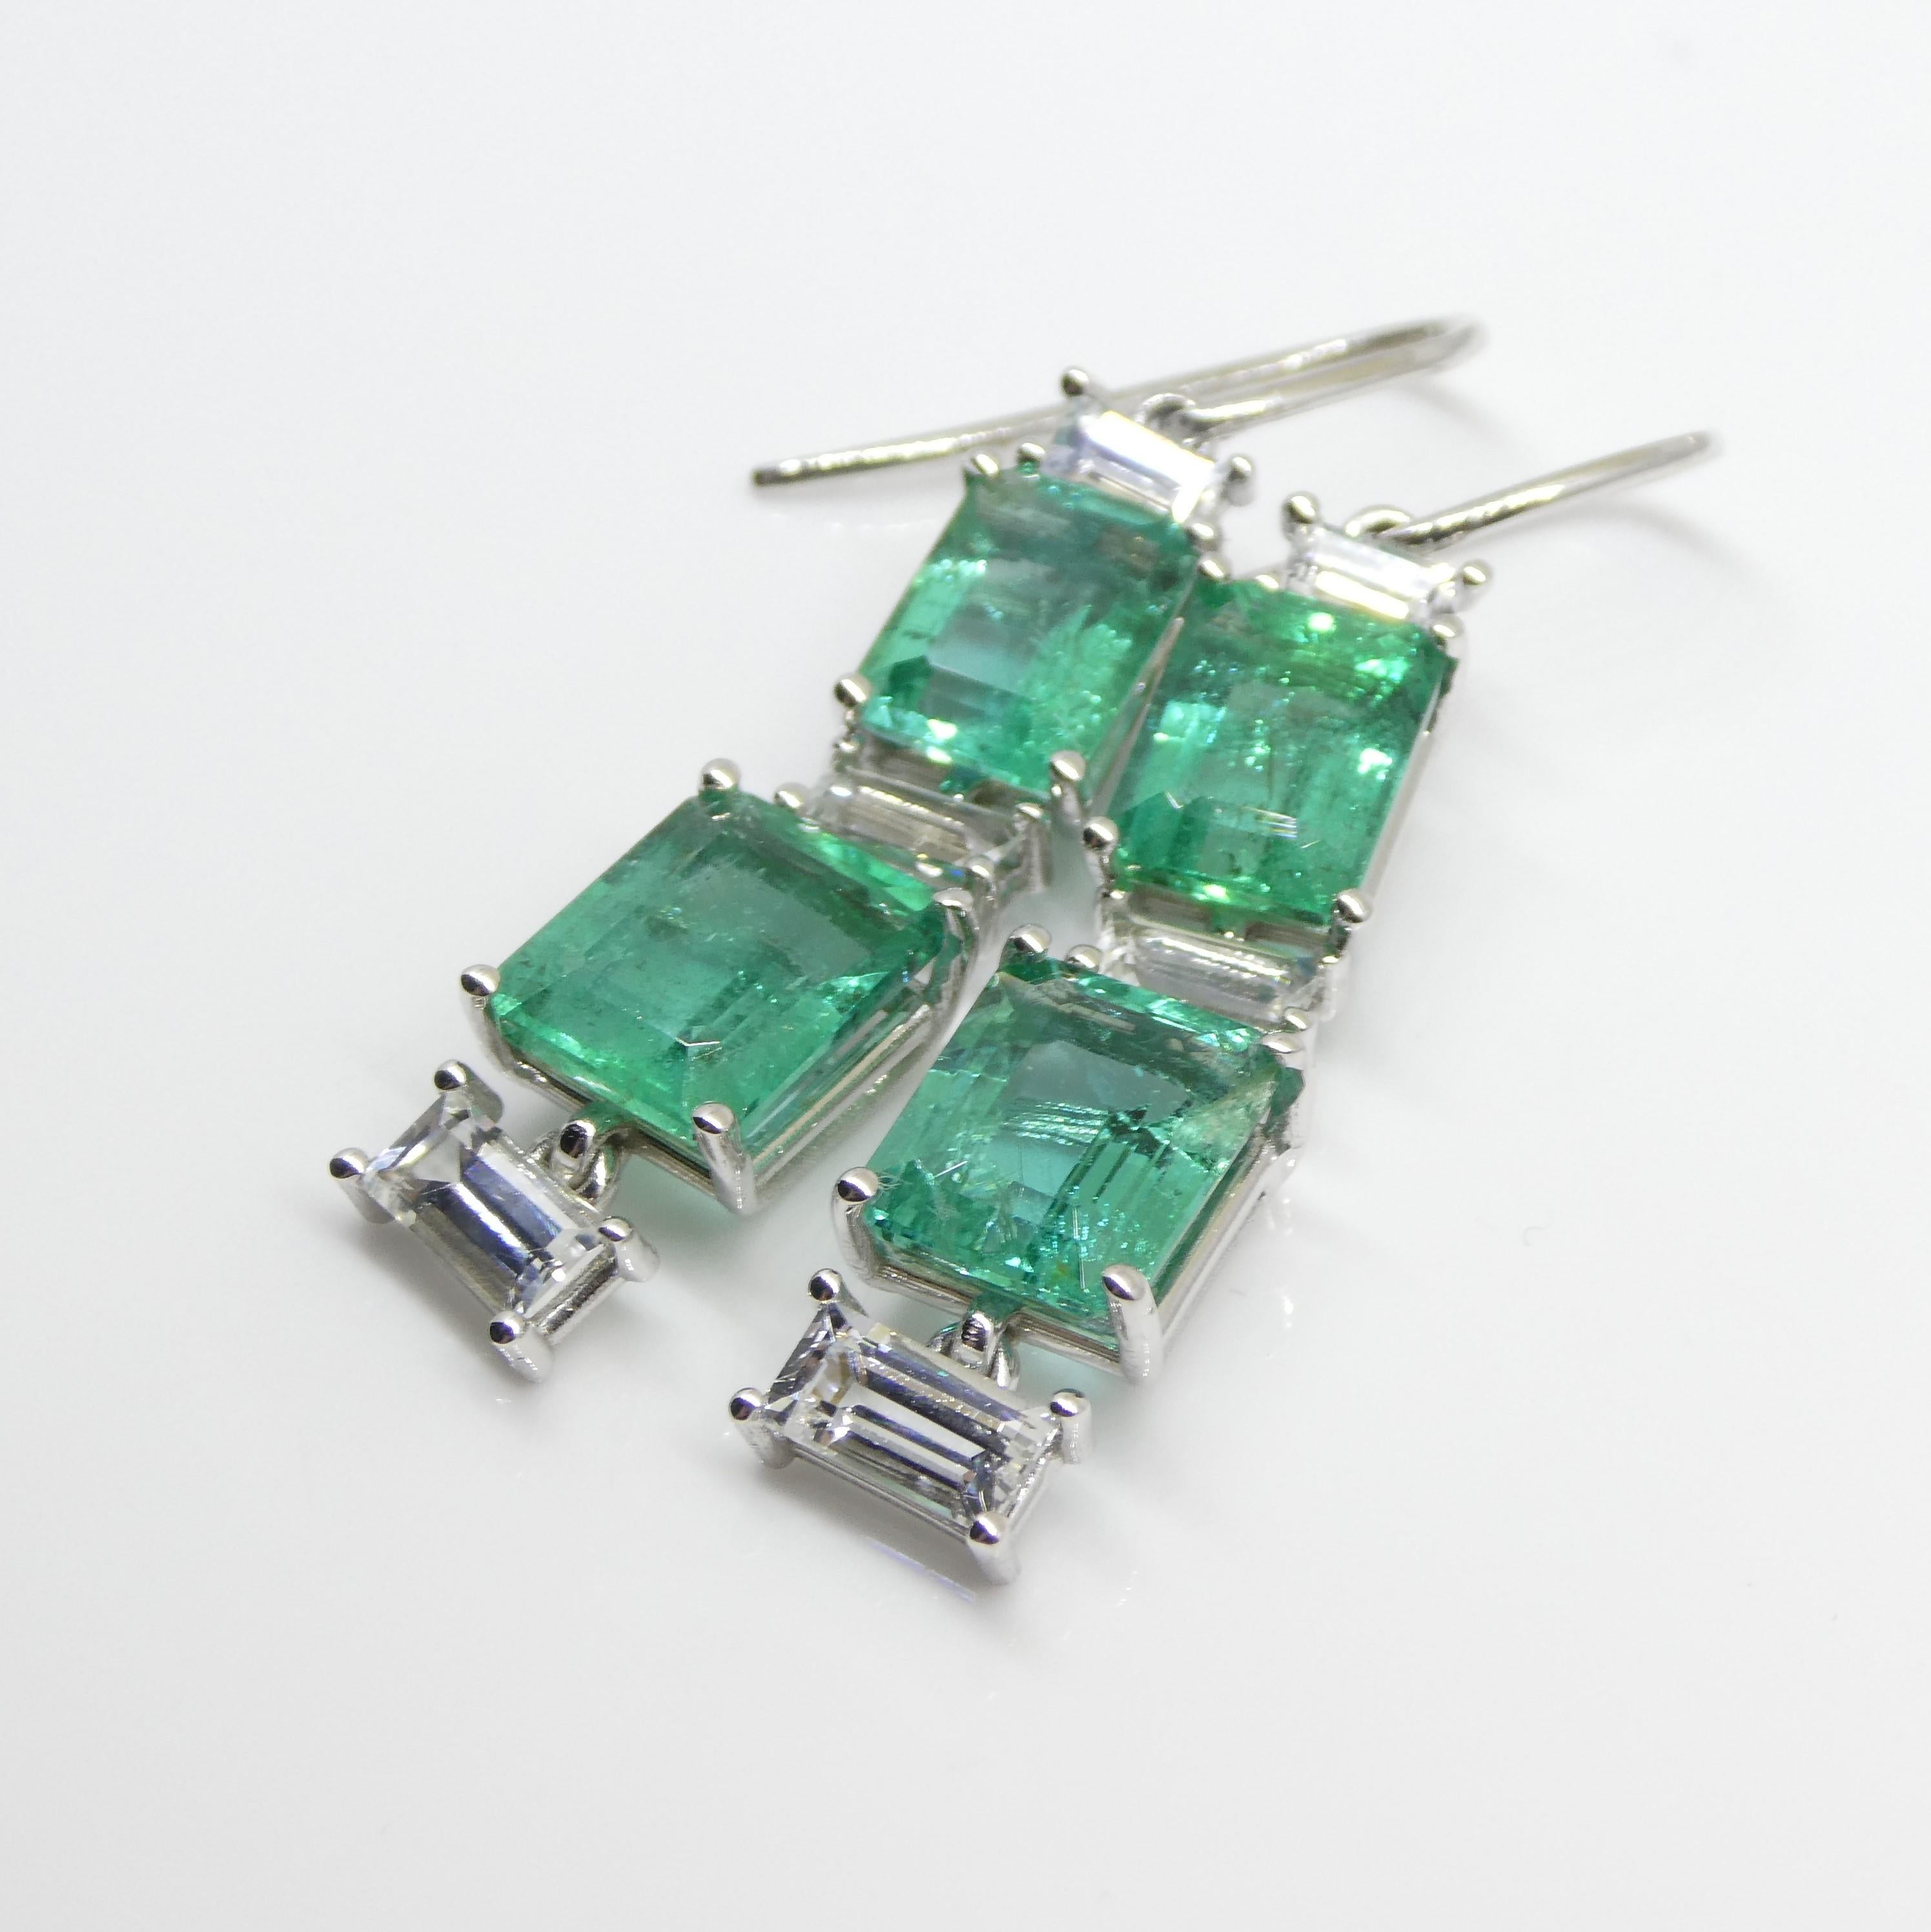 7.80ct Emerald, 1.80ct White Sapphire Earrings in 14k White Gold 14